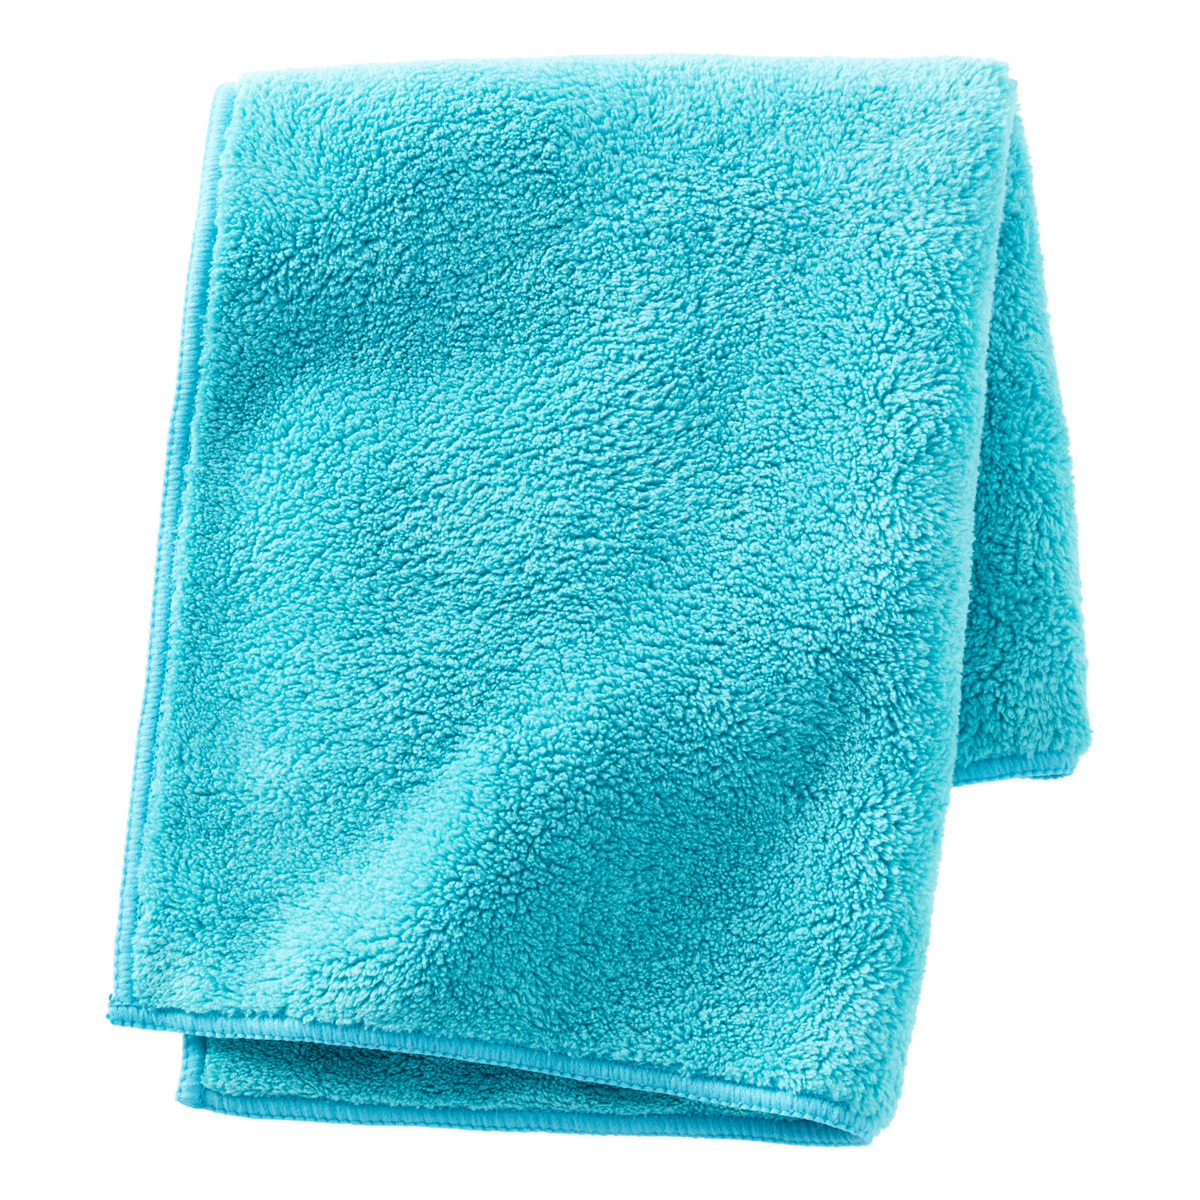 Family Treasures The Cleaning Cloth- Streakless Microfiber Cloth